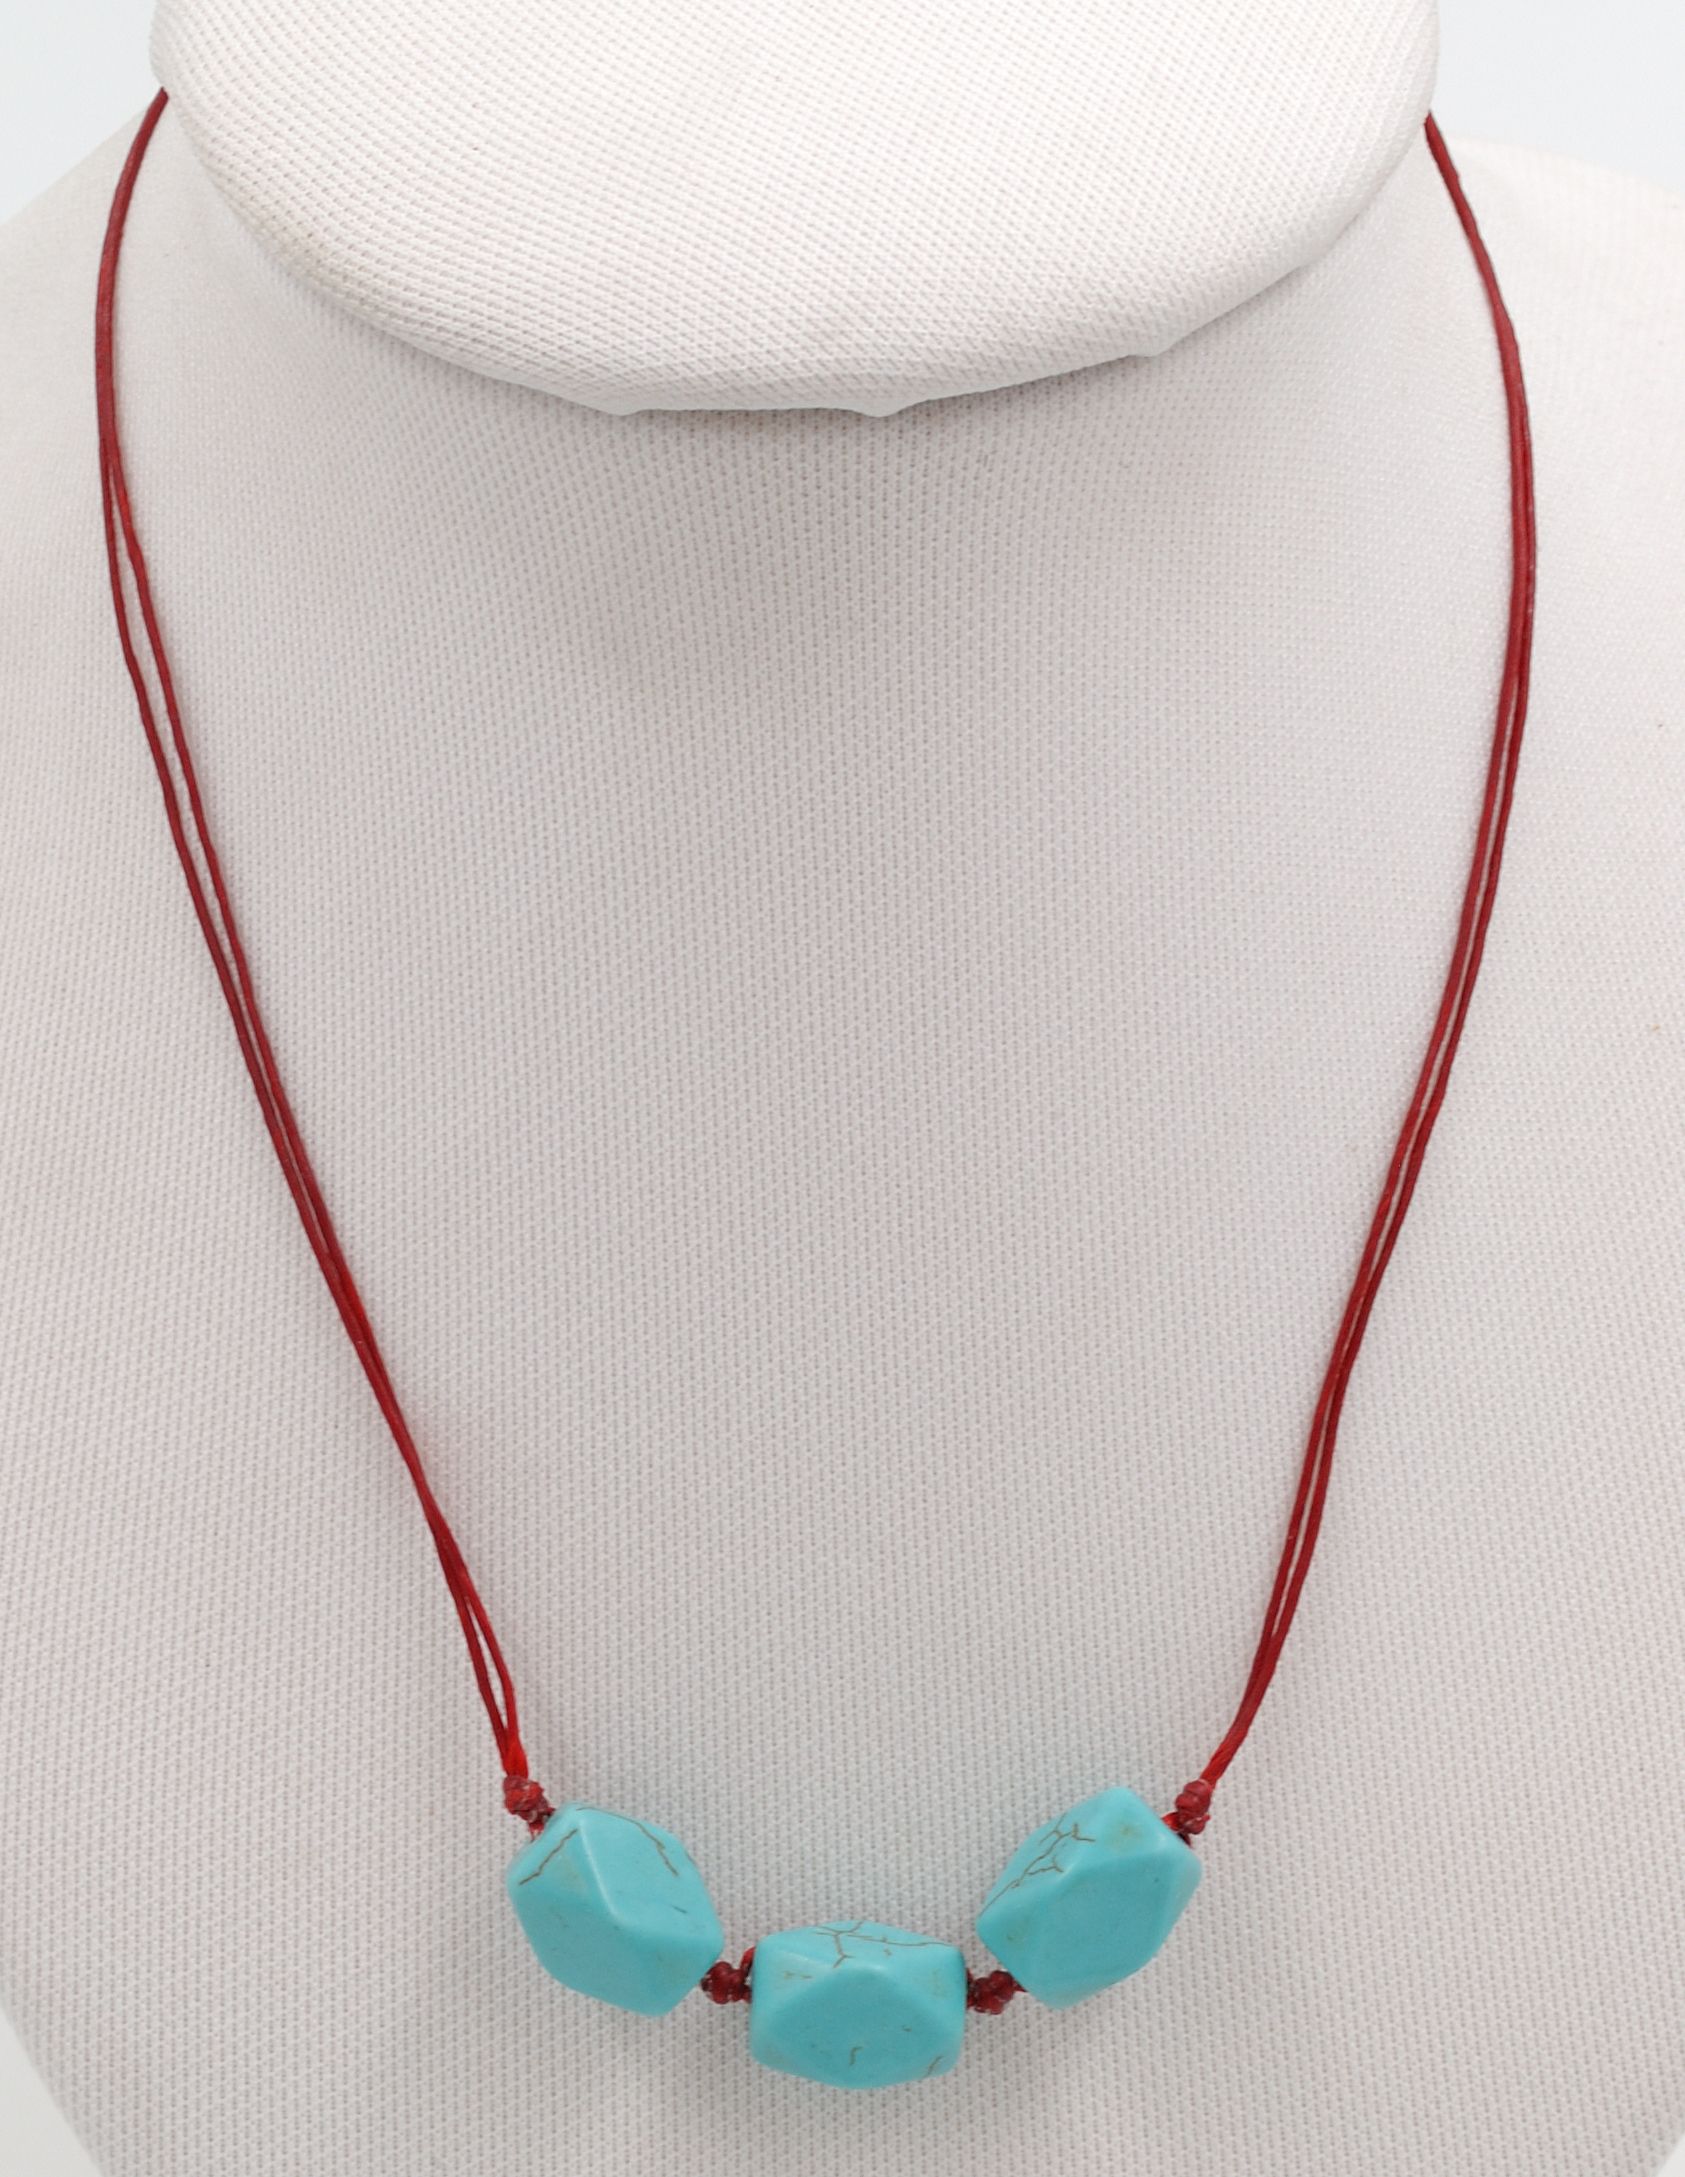 Turquoise Poise Necklace